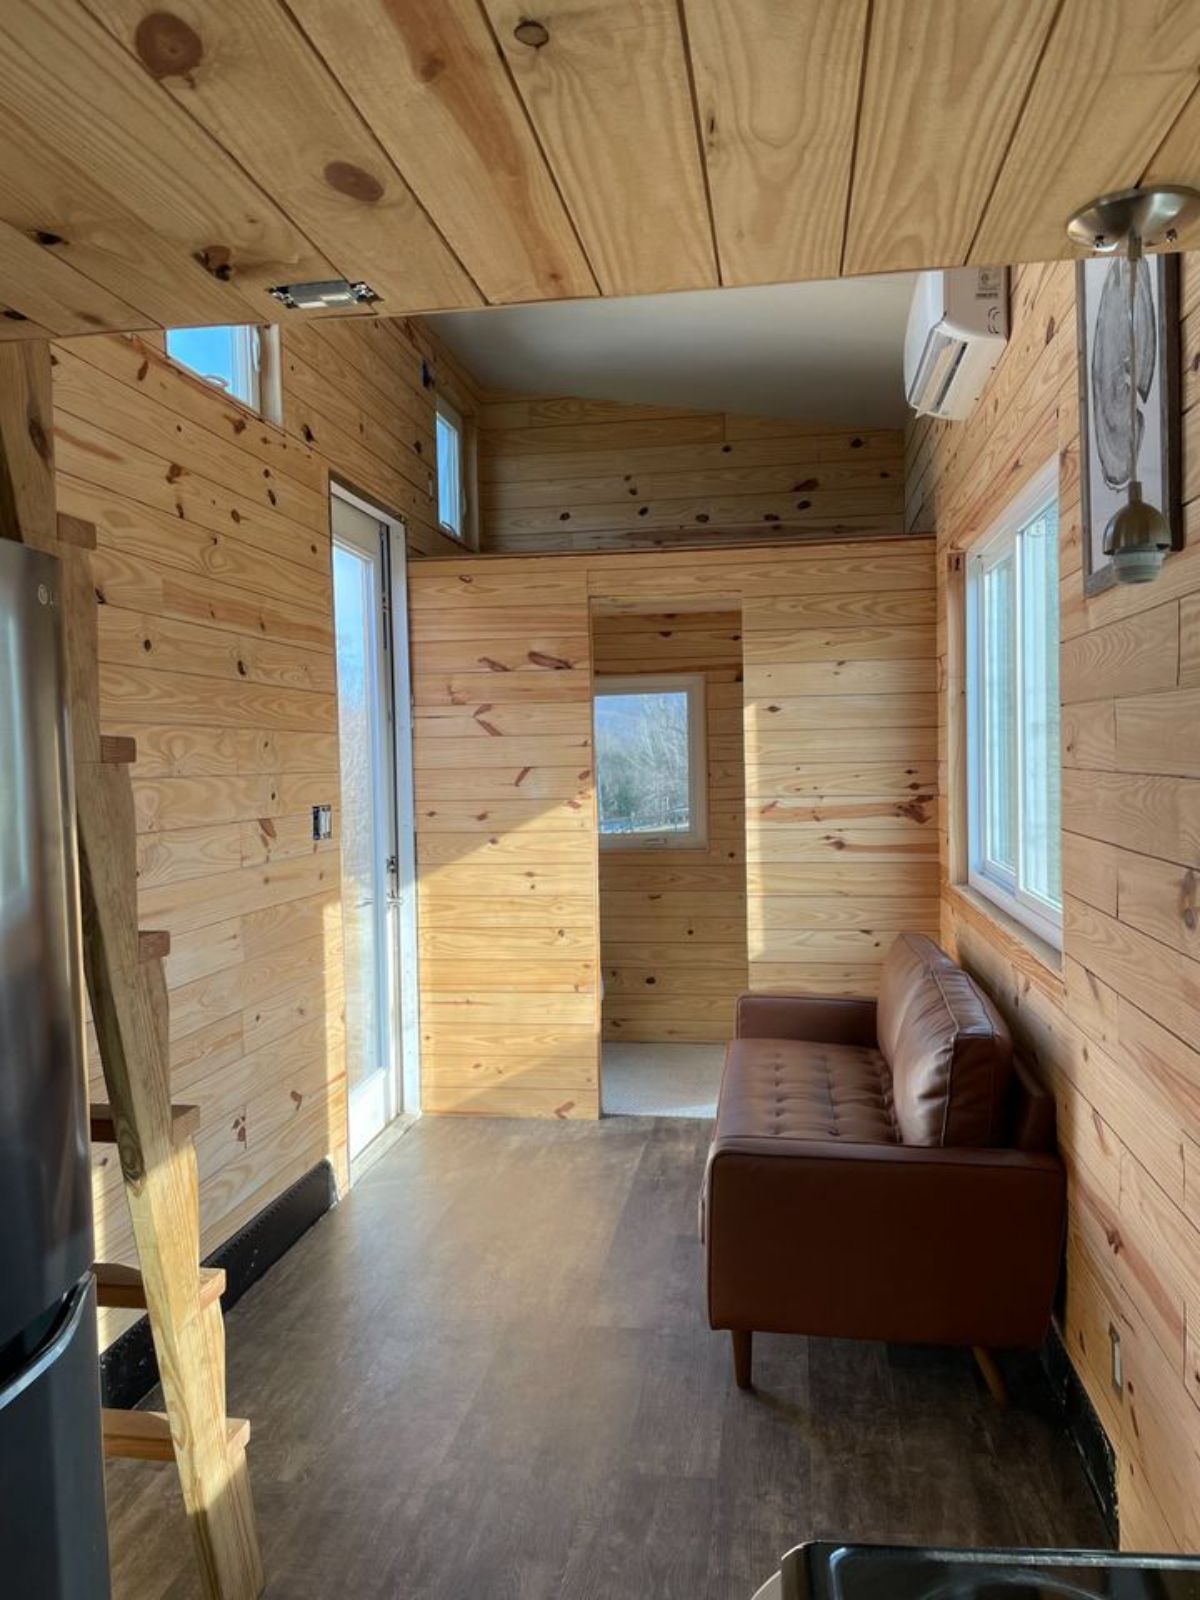 Wooden interior of 24’ Tiny House on Wheels plus a guest loft above the bathroom